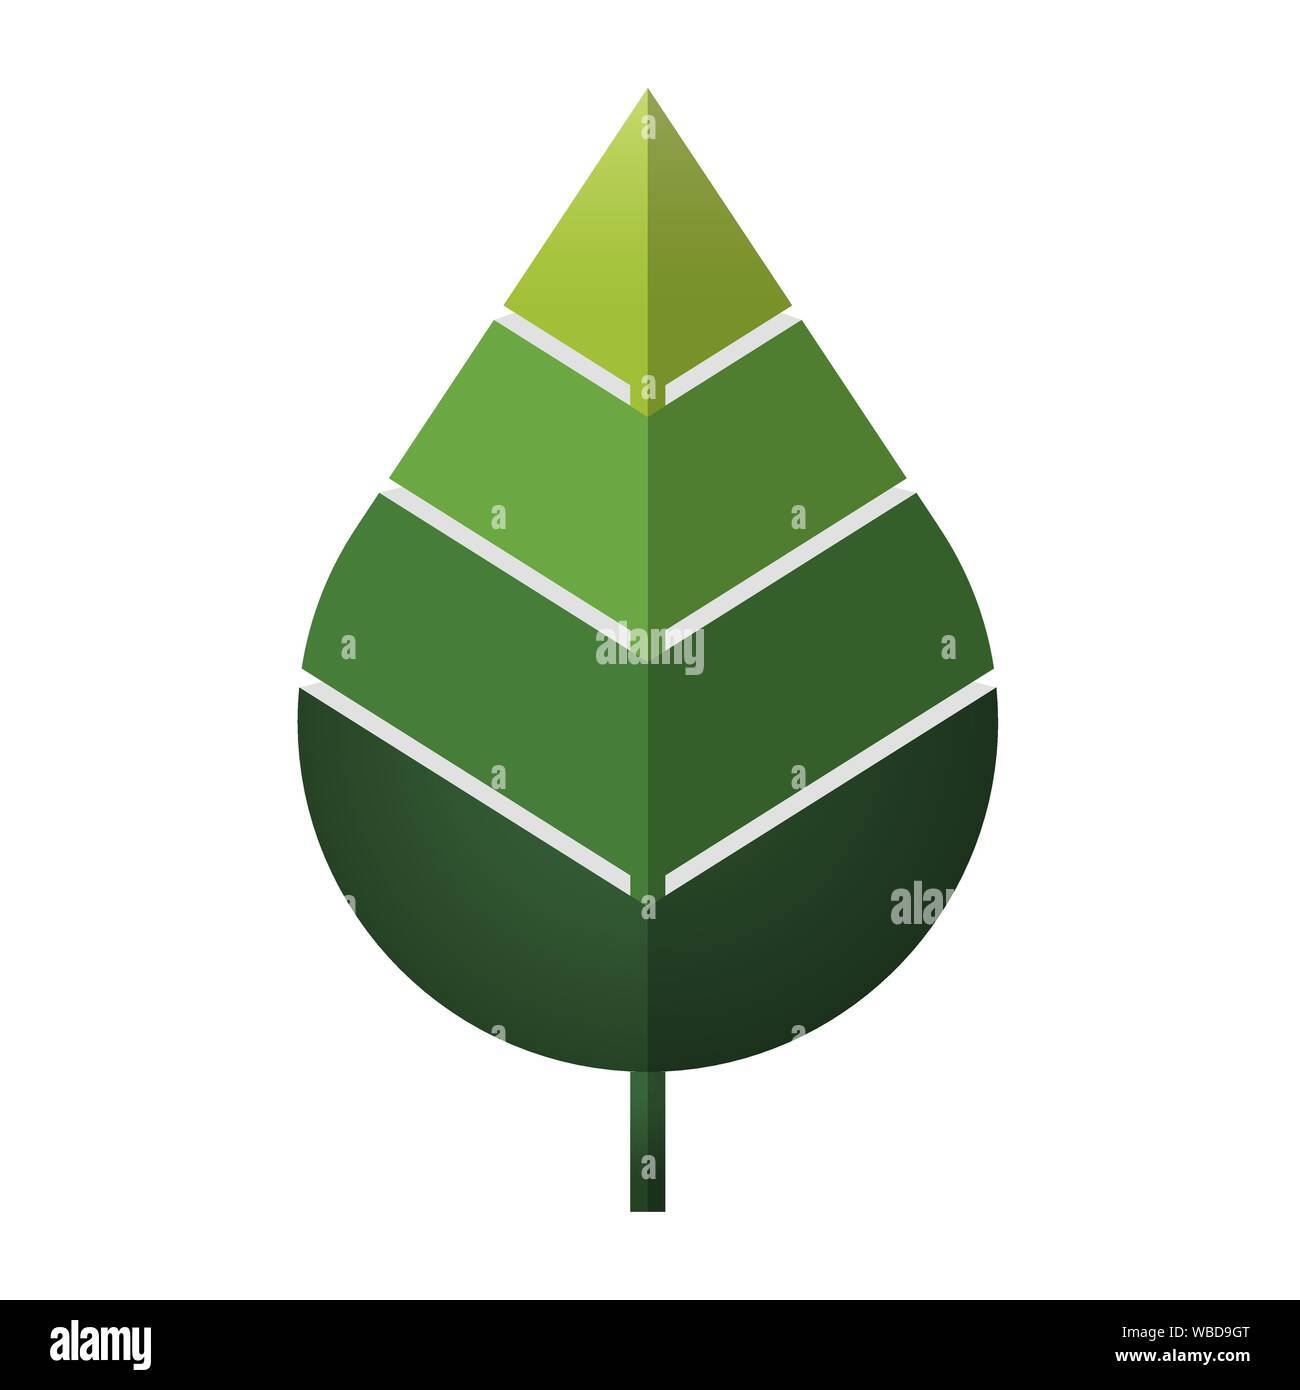 Vector illustration. Leaf icon as monolith or pyramid, in green tones. Stock Vector